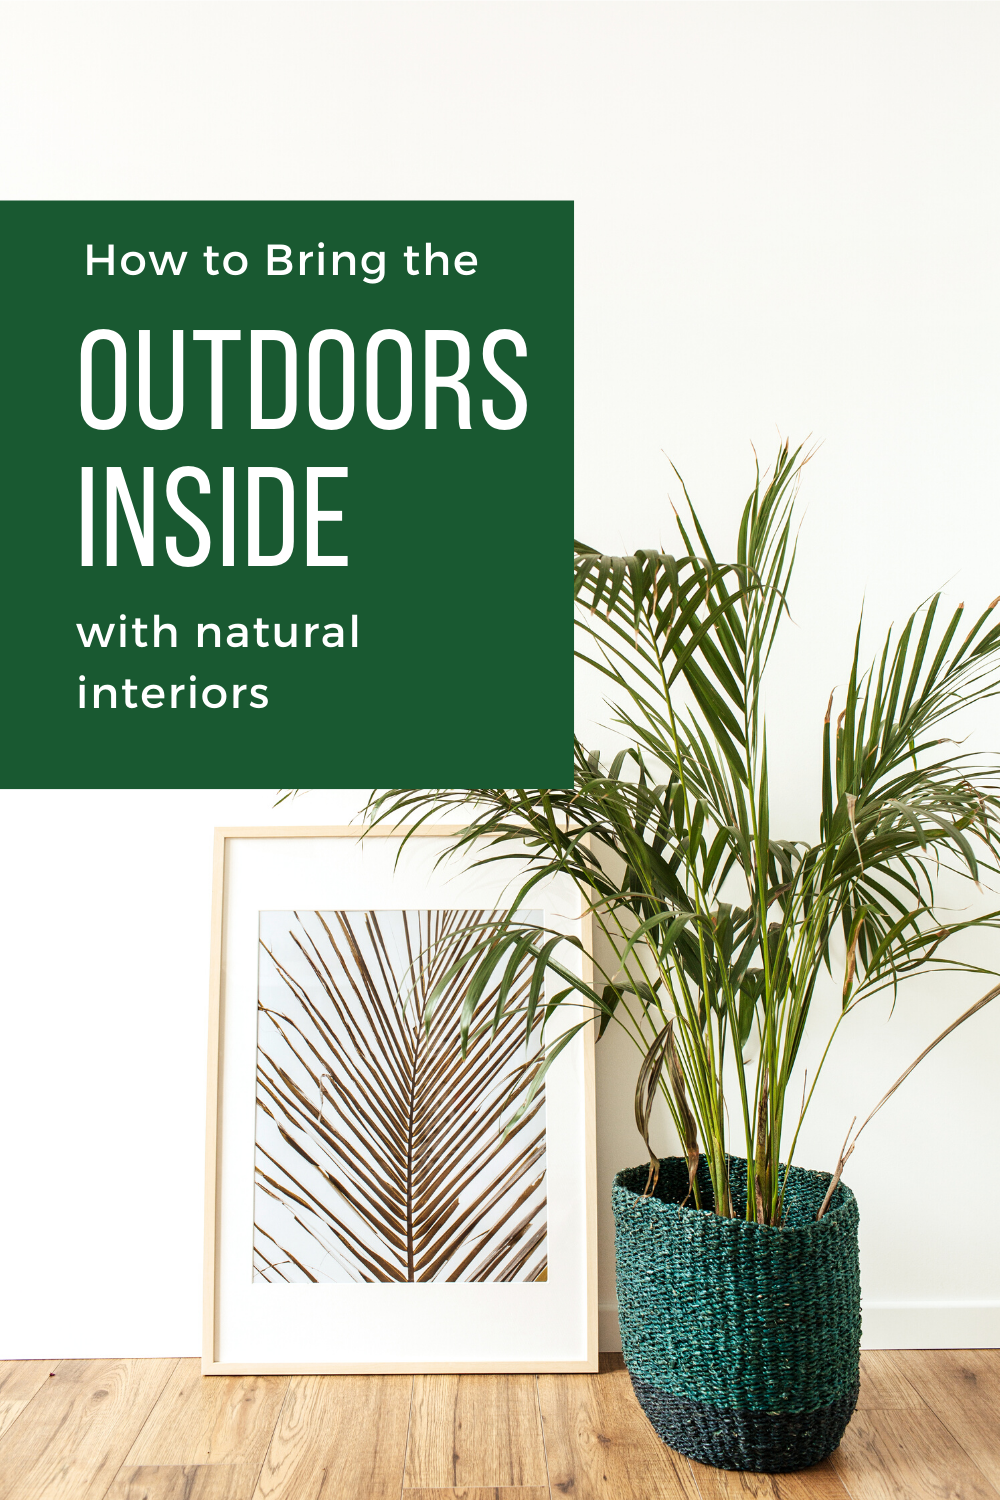 How to bring the outdoors inside with natural interiors. Decor and DIY ways to capture the natures essence indoors. 7 different ways to bring the outdoors inside your home, from furniture, to art, and decor, and accents that are inspired by the great outdoors and mother nature. #homedecor #naturalliving #plantsindecor #naturalinteriors